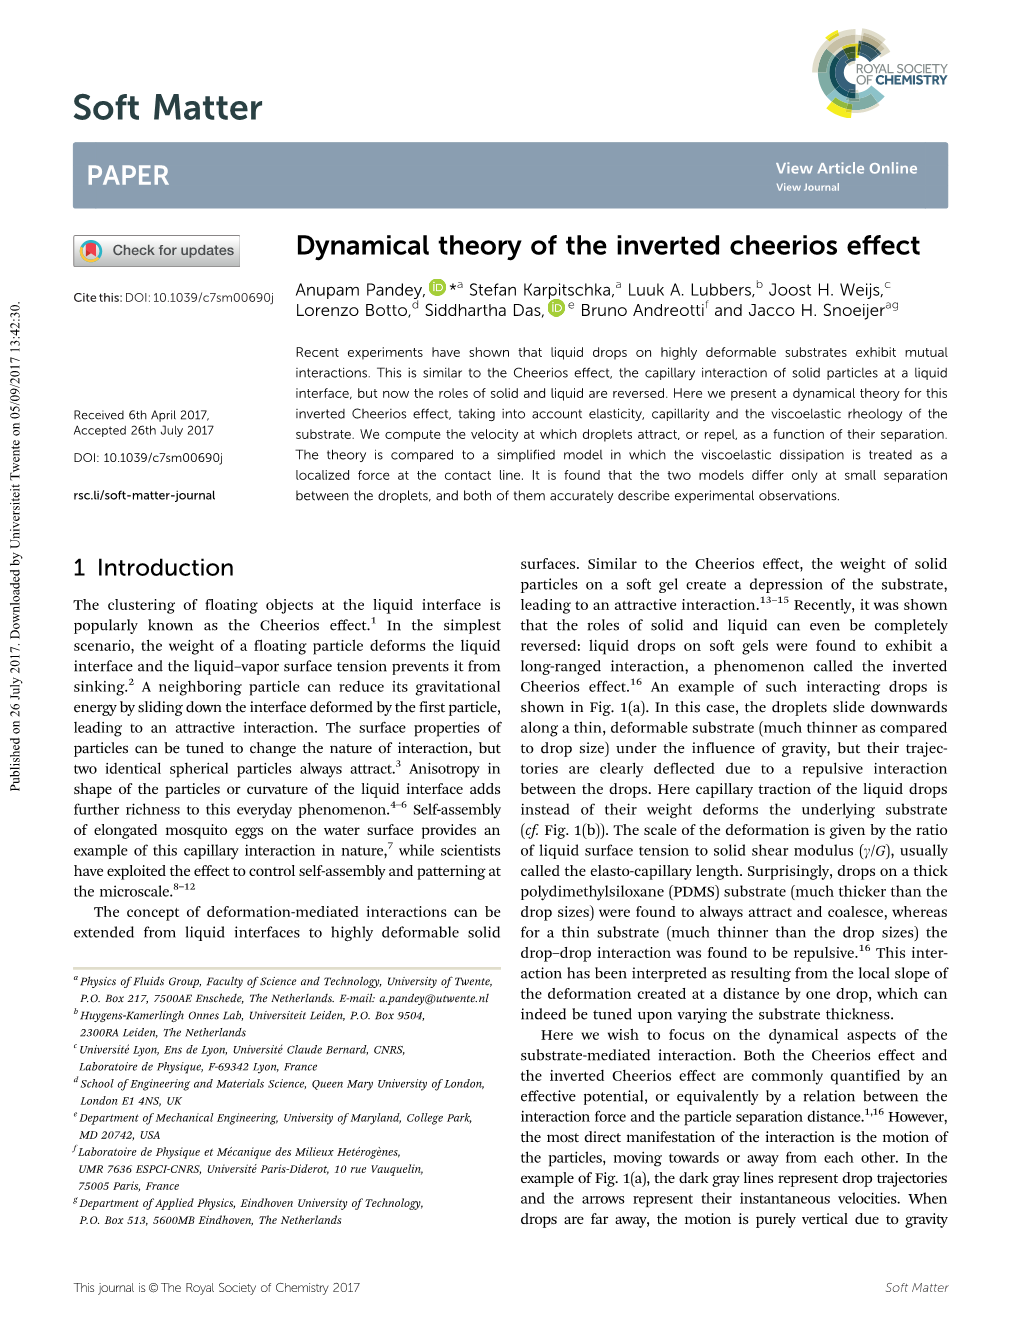 Dynamical Theory of the Inverted Cheerios Effect